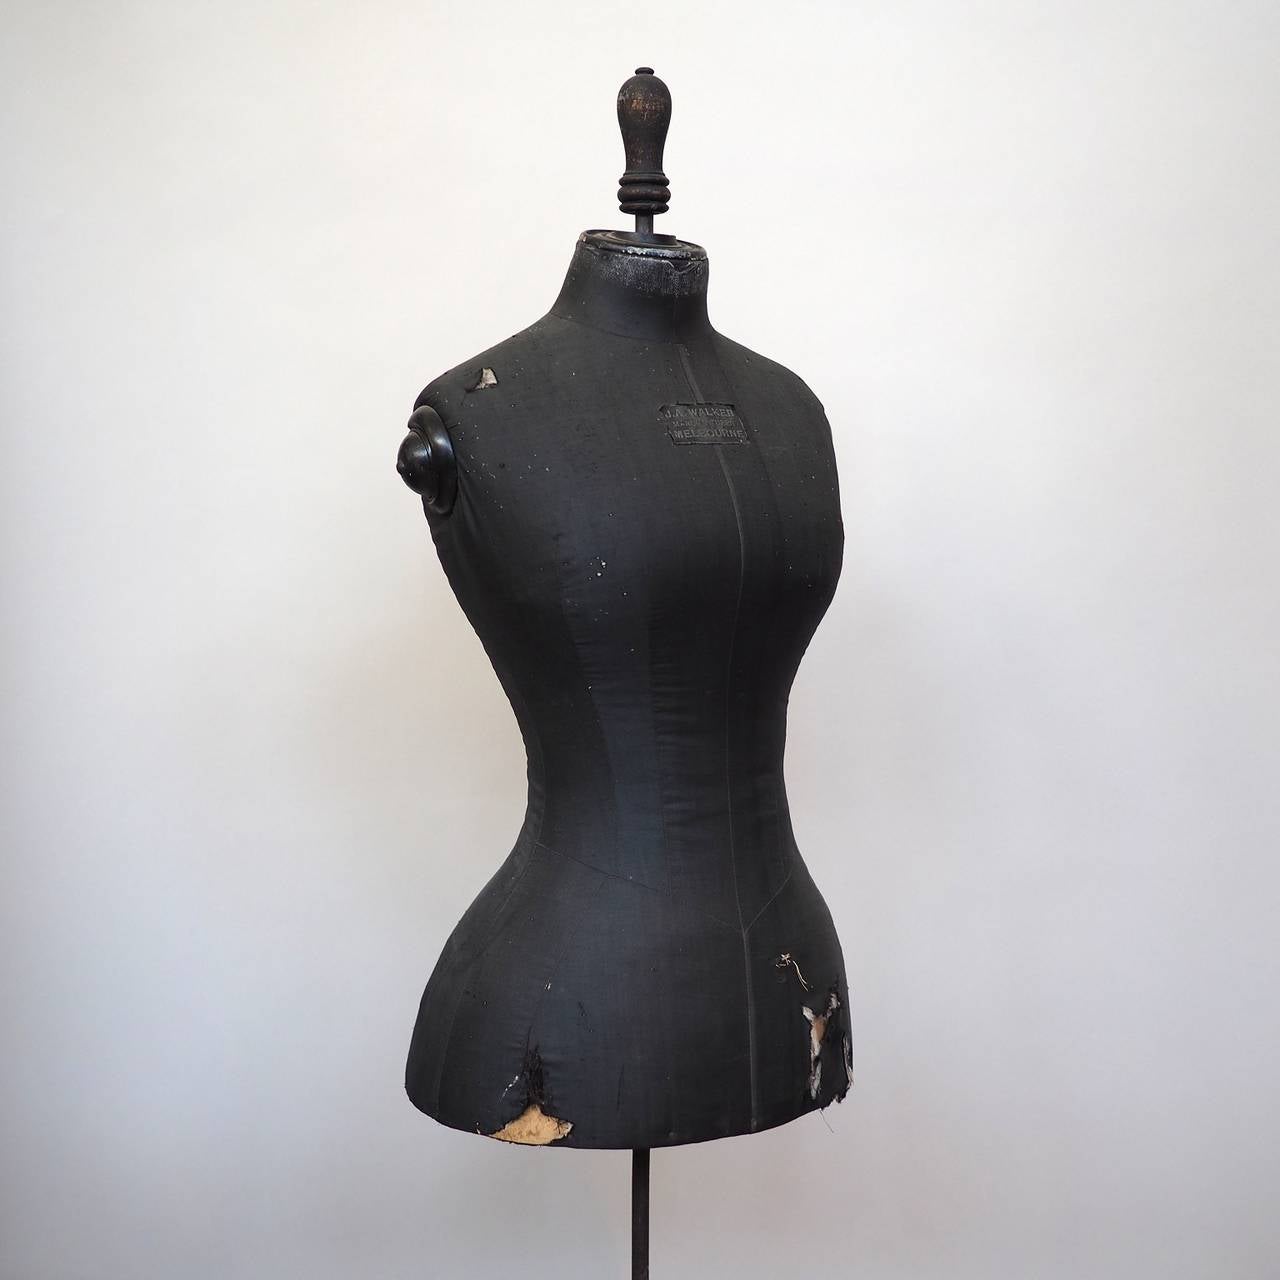 silk-covered bodice, with maker's label for J.A. Walker, Melbourne. Shaped with a tiny waist and bustle, on a black-painted timber stand.